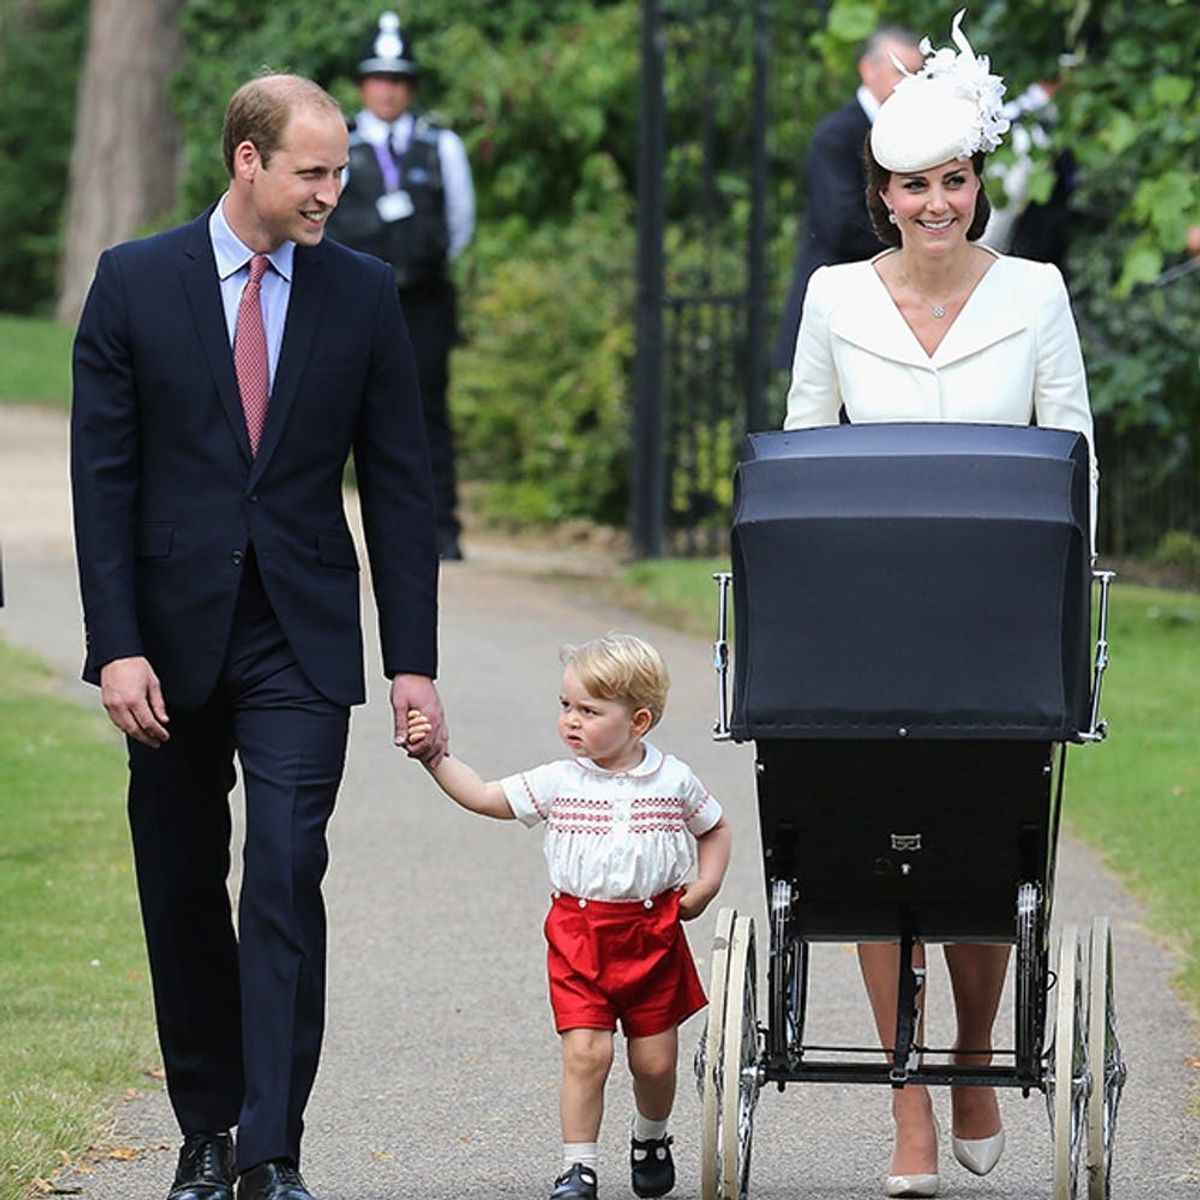 The First Family Photo With Princess Charlotte Is Stunning